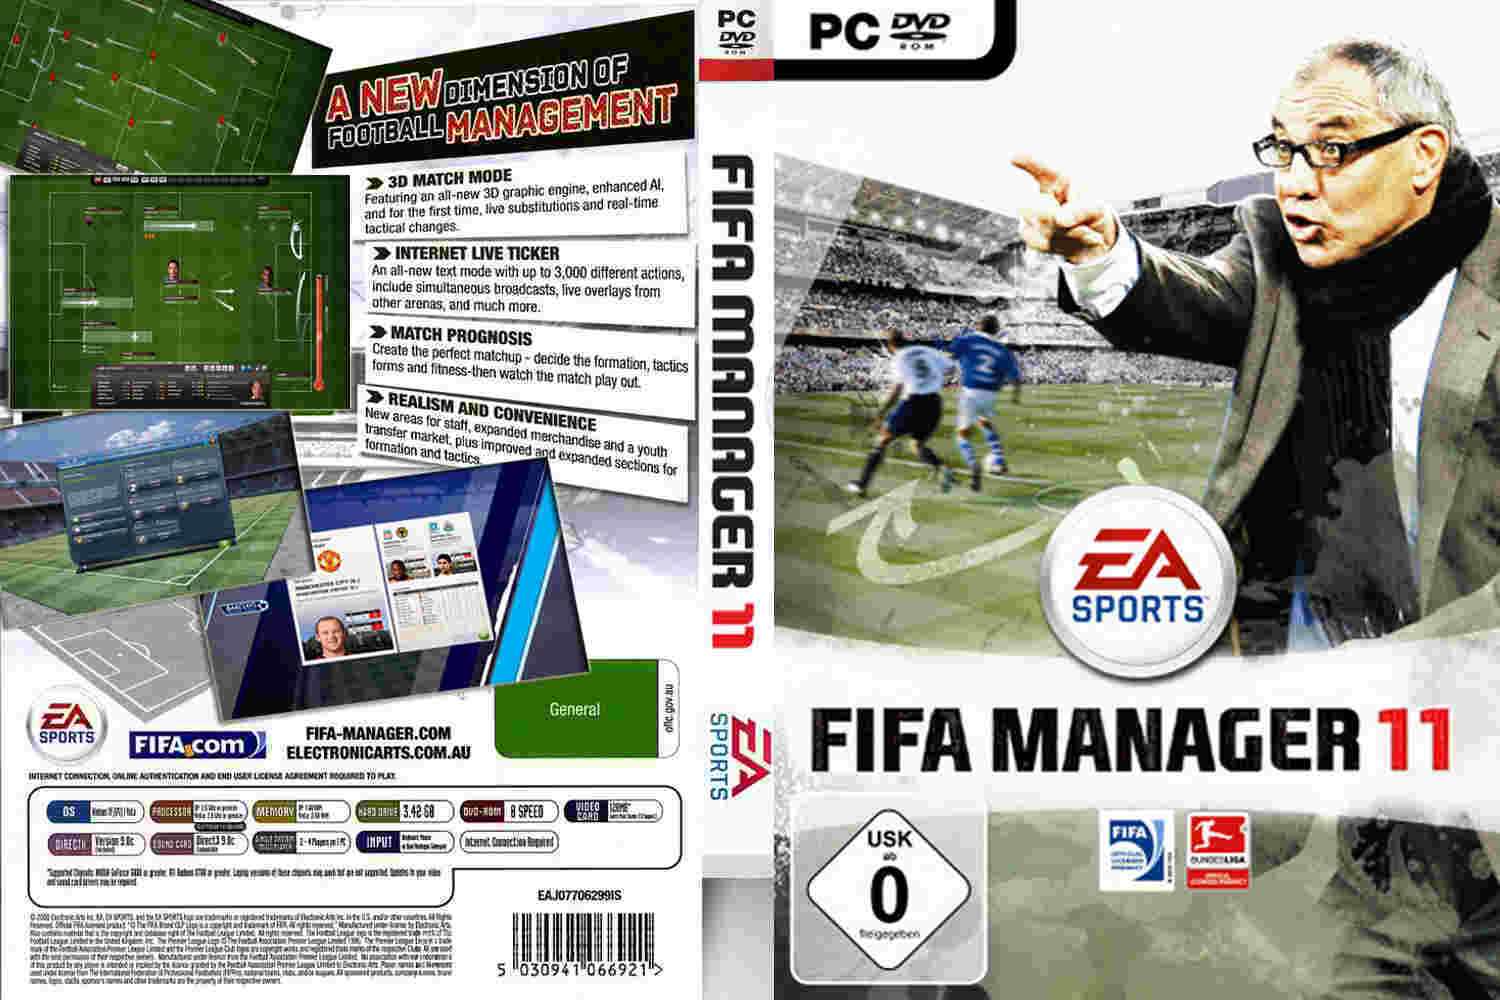 Fifa manager русская. ФИФА менеджер. ФИФА менеджер 11. Игра ФИФА Манагер. FIFA Manager 2009.